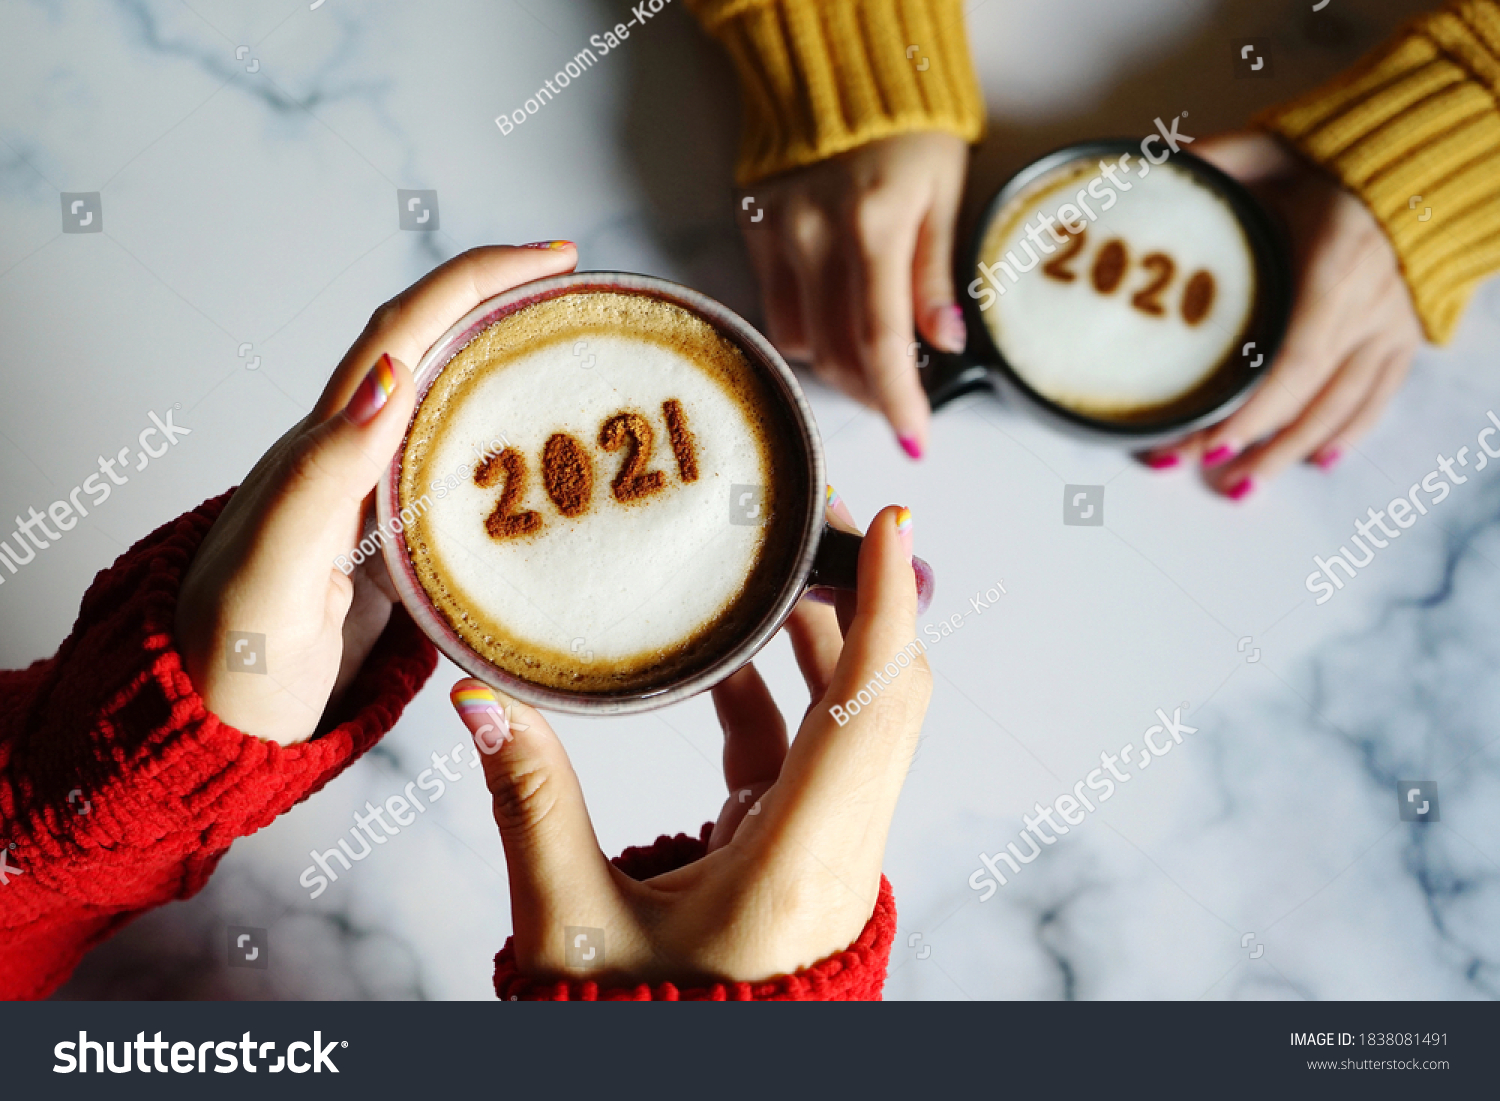 Goodbye 2020, Hello 2021 theme coffee cup with number 2021 on frothy surface in female hands holding and another one with number 2020 on frothy surface over marble table background. Holidays food art. #1838081491